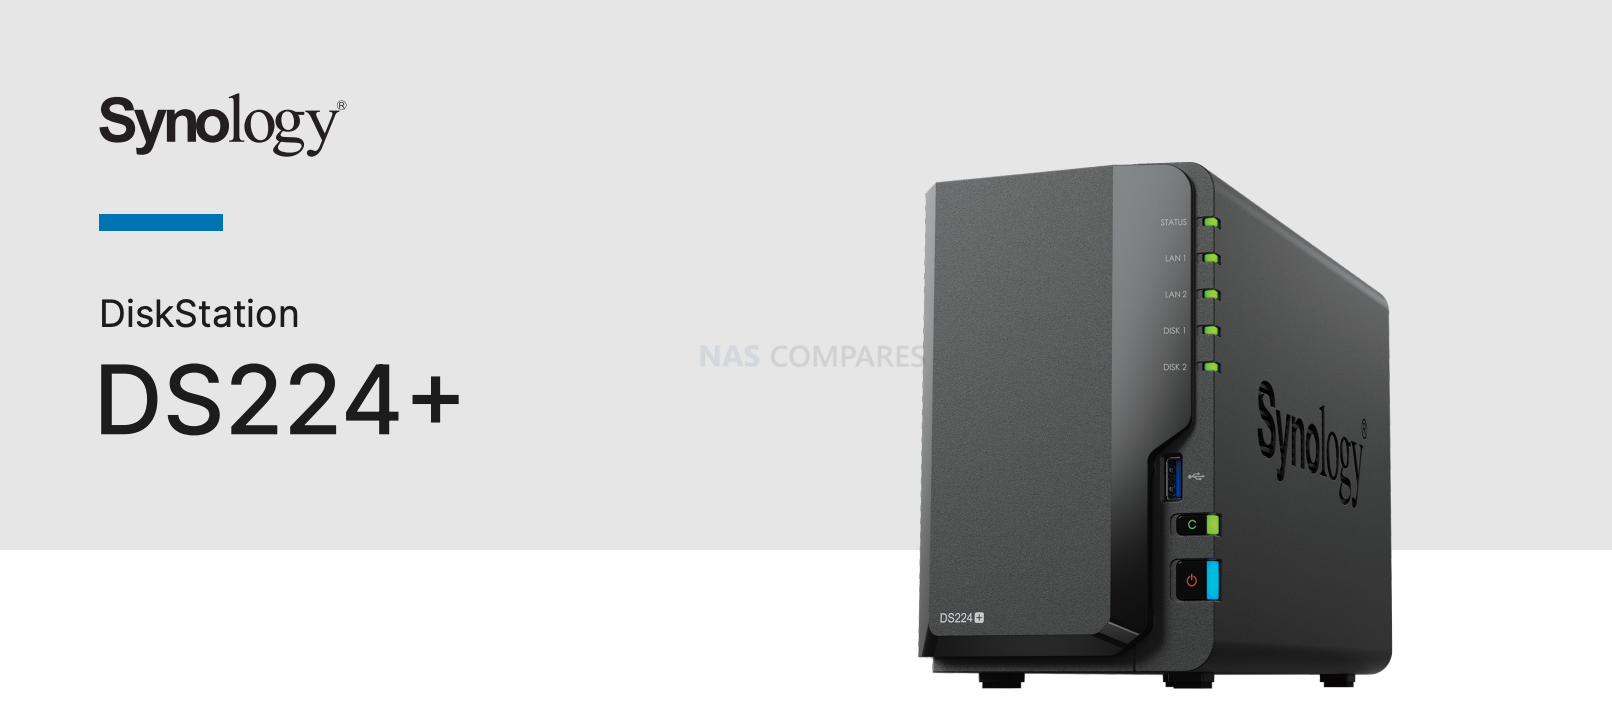 Synology 2-bay NAS range compared (DS223j, DS223, DS224+, DVA1622